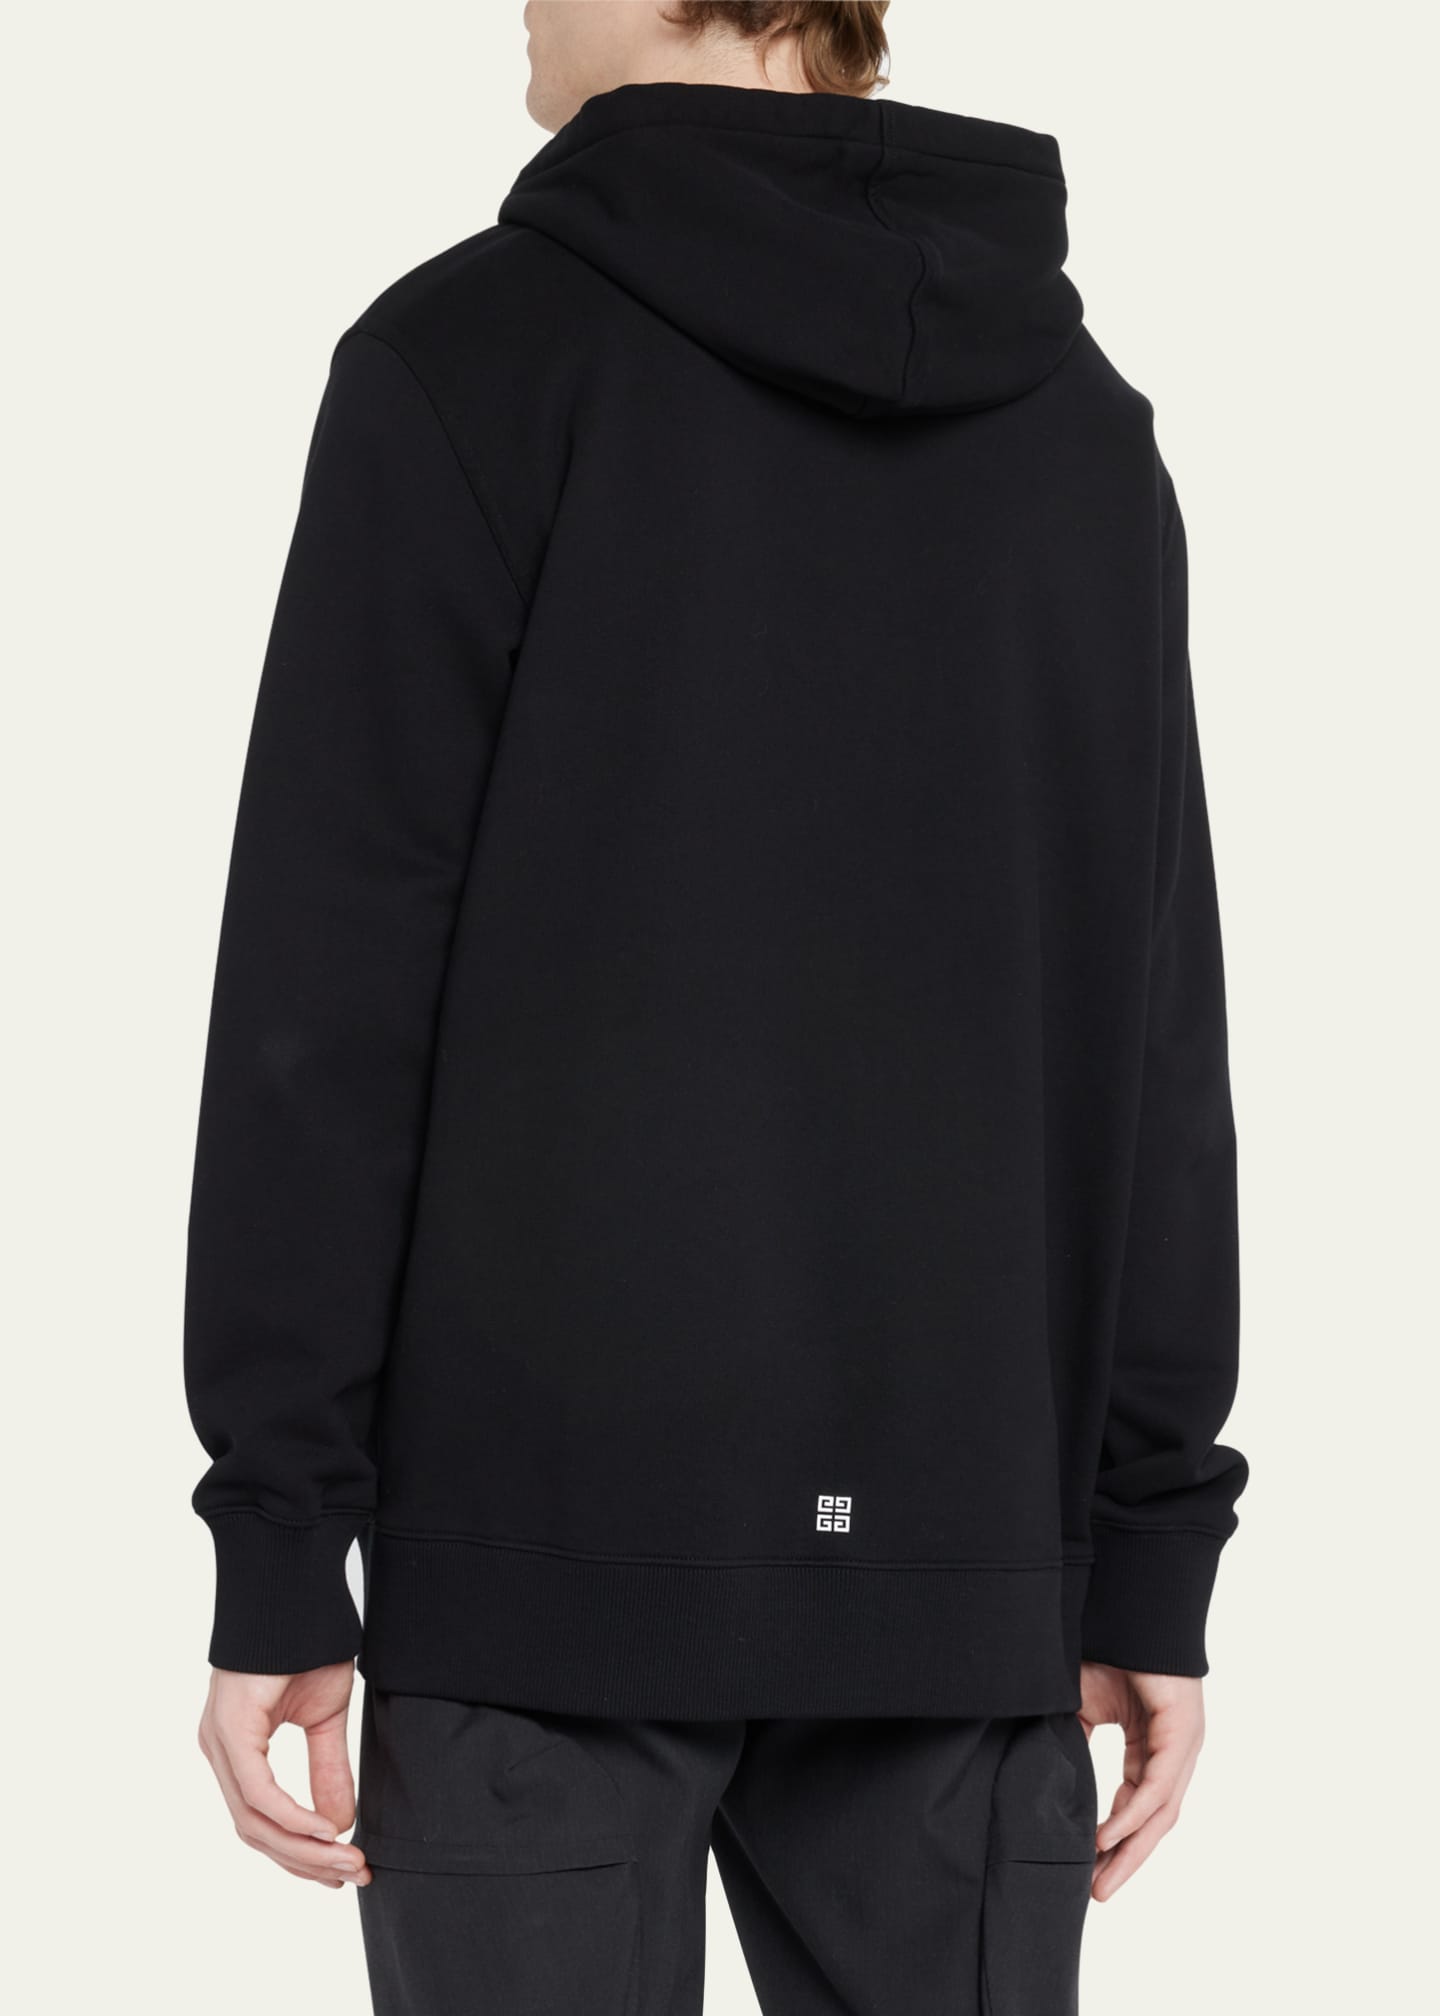 Givenchy Men's Classic-Fit Logo Hoodie - Bergdorf Goodman